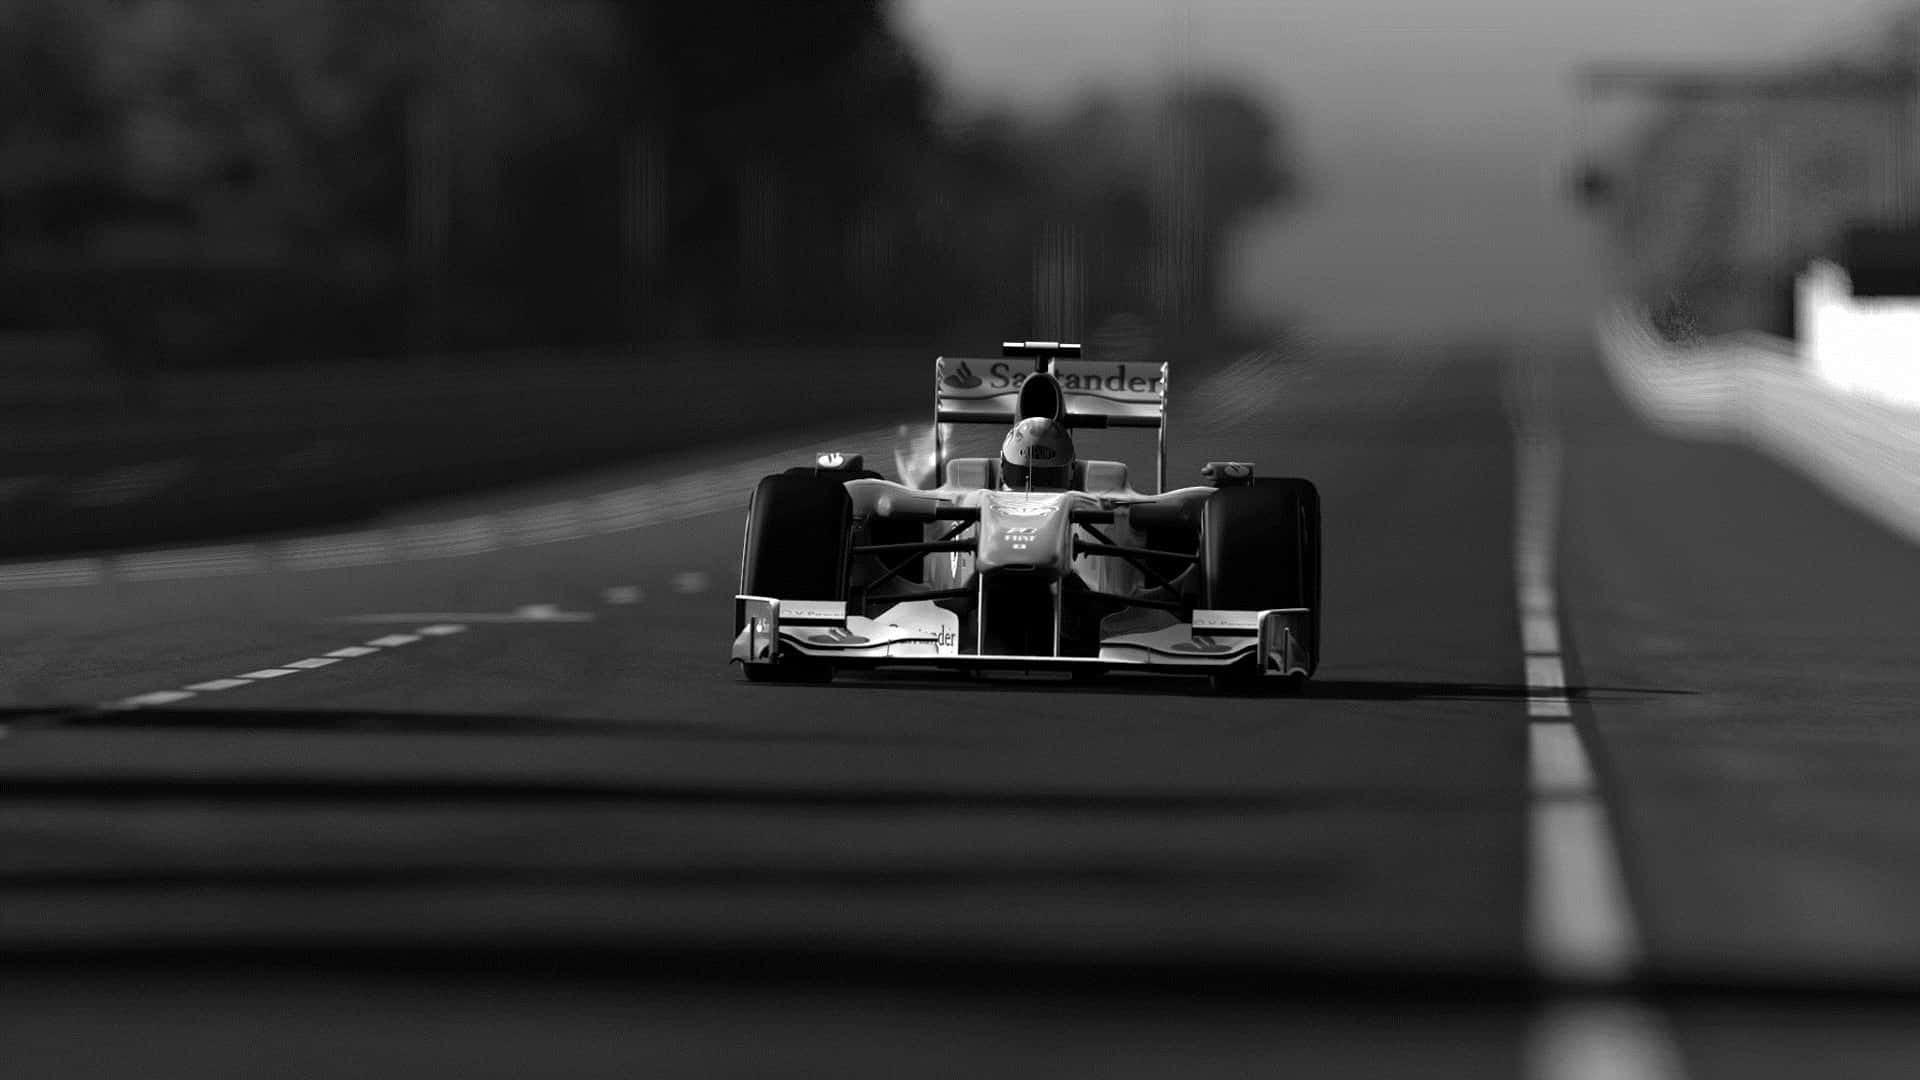 A Black And White Photo Of A Racing Car On A Road Wallpaper